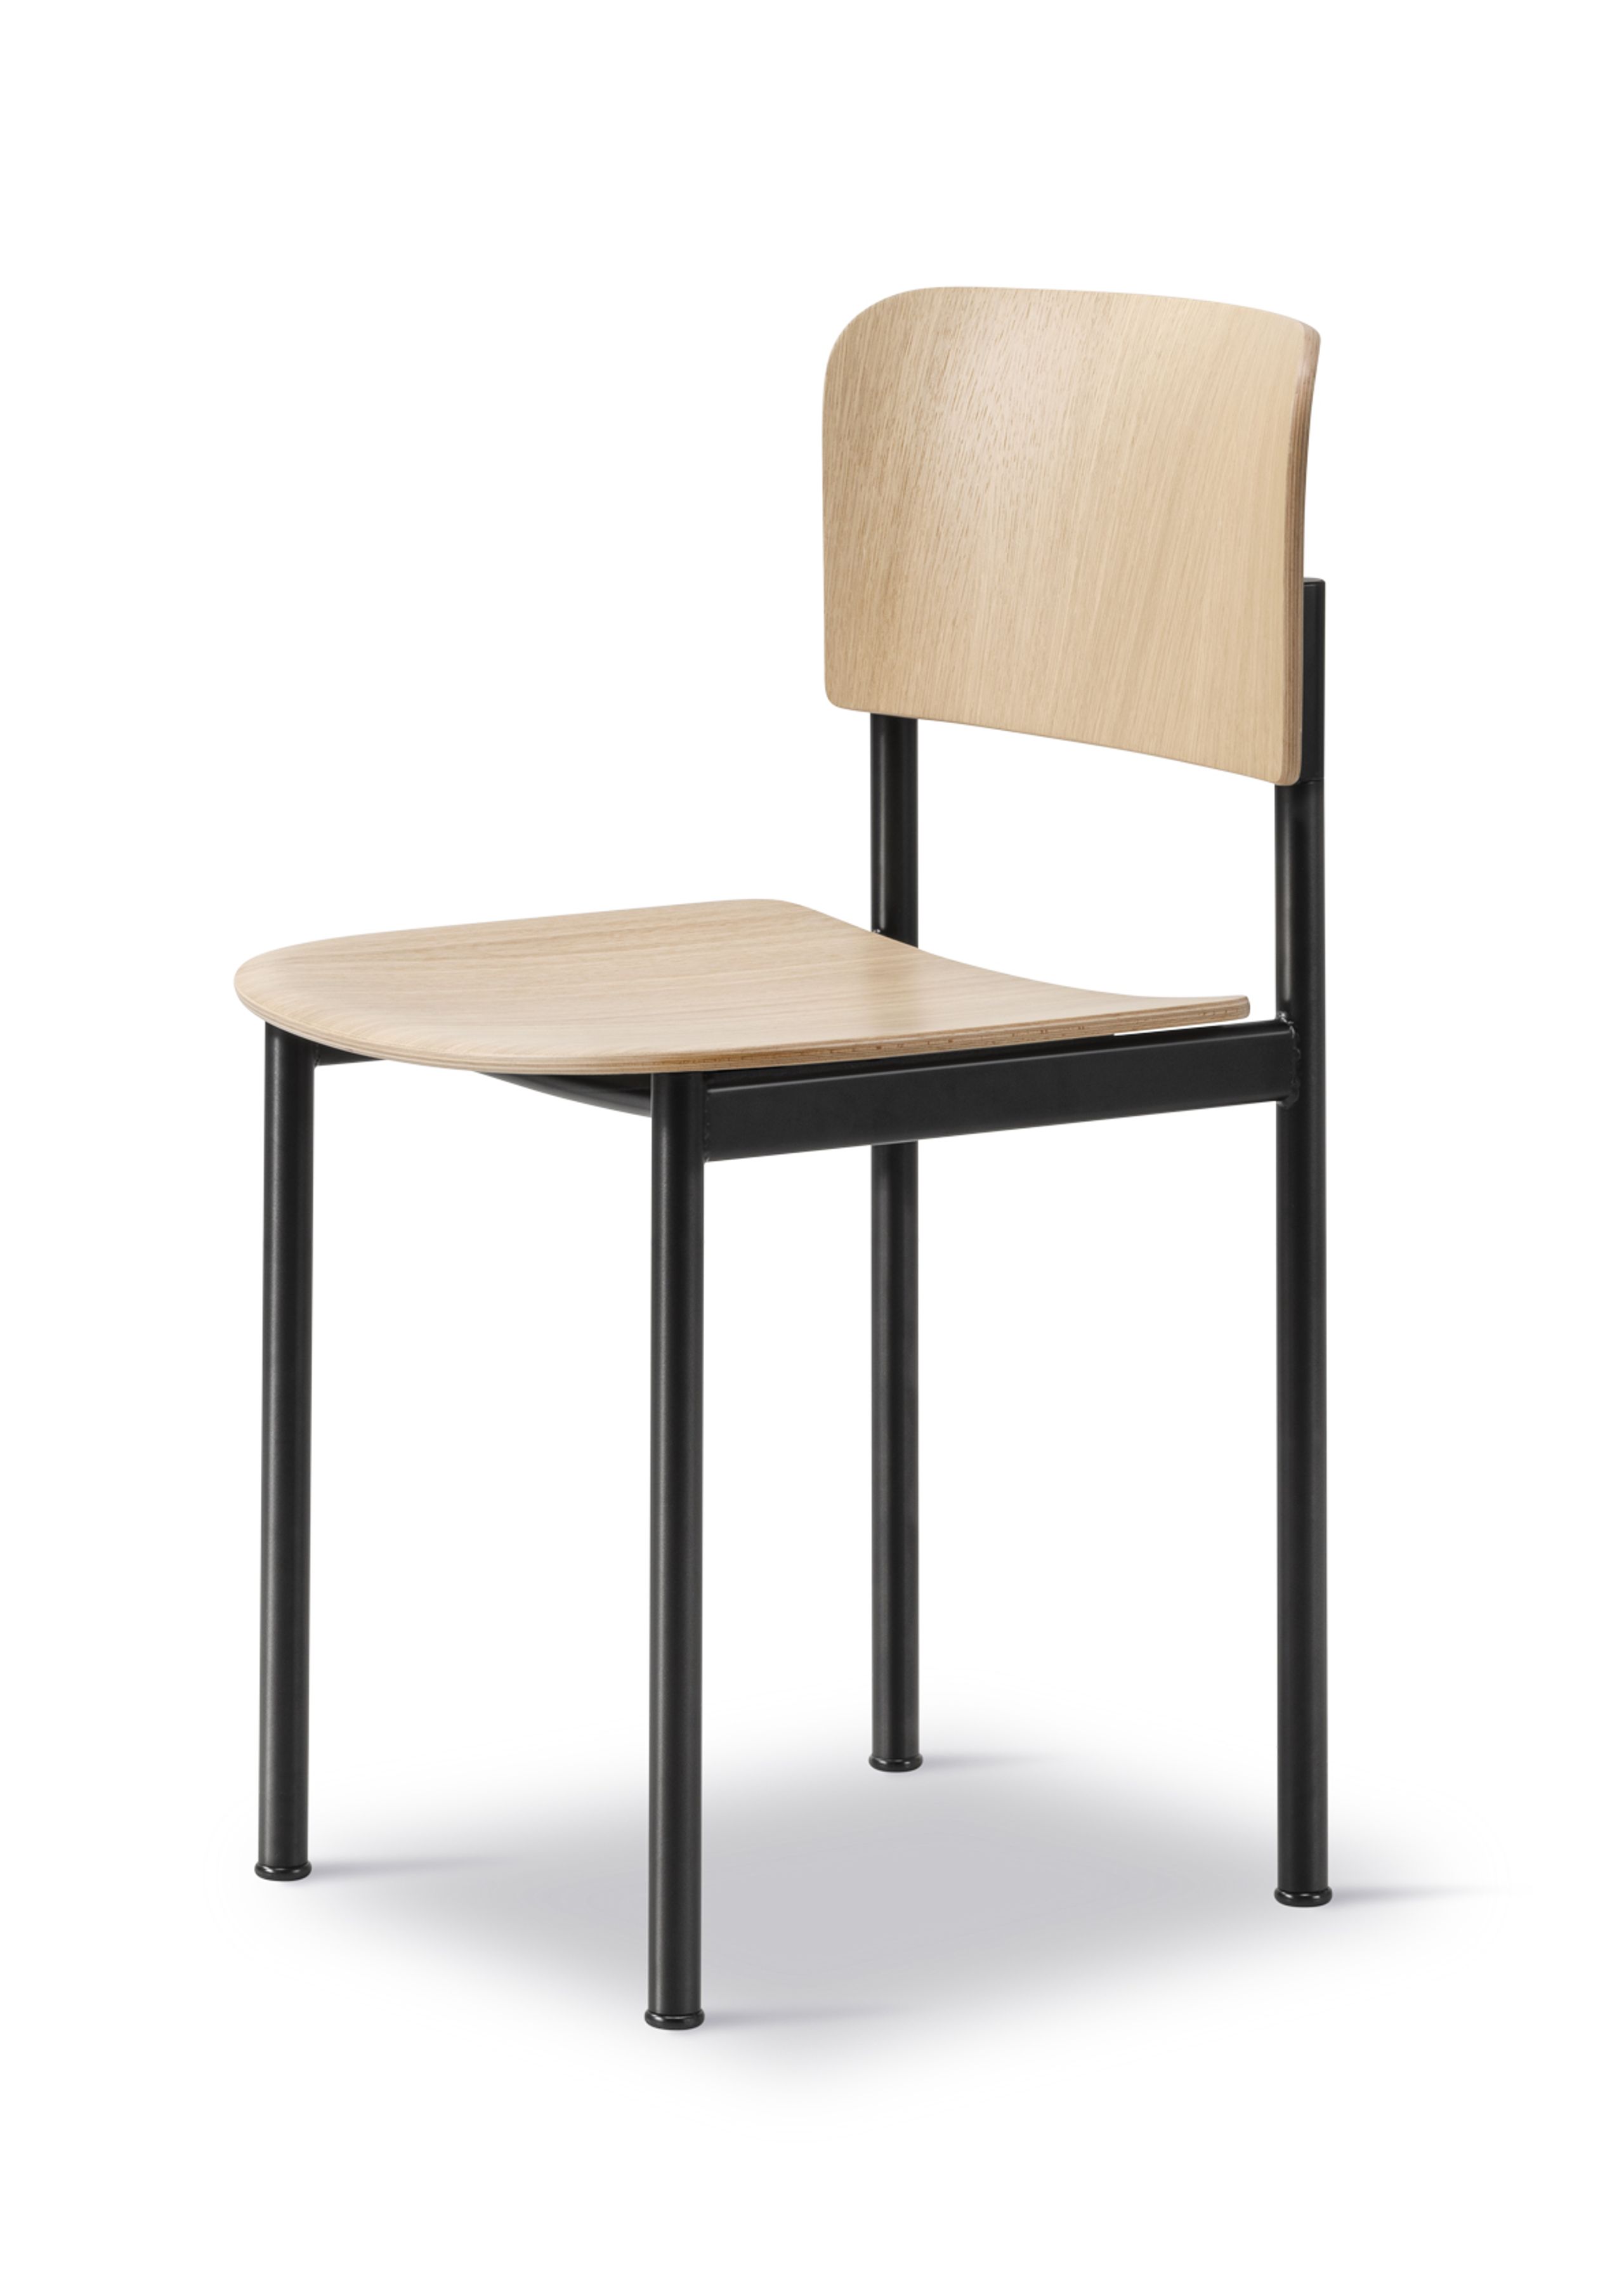 Fredericia Furniture - Chaise à manger - Plan Chair 3412 by Edward Barber & Jay Osgerby - Lacquered Oak / Black